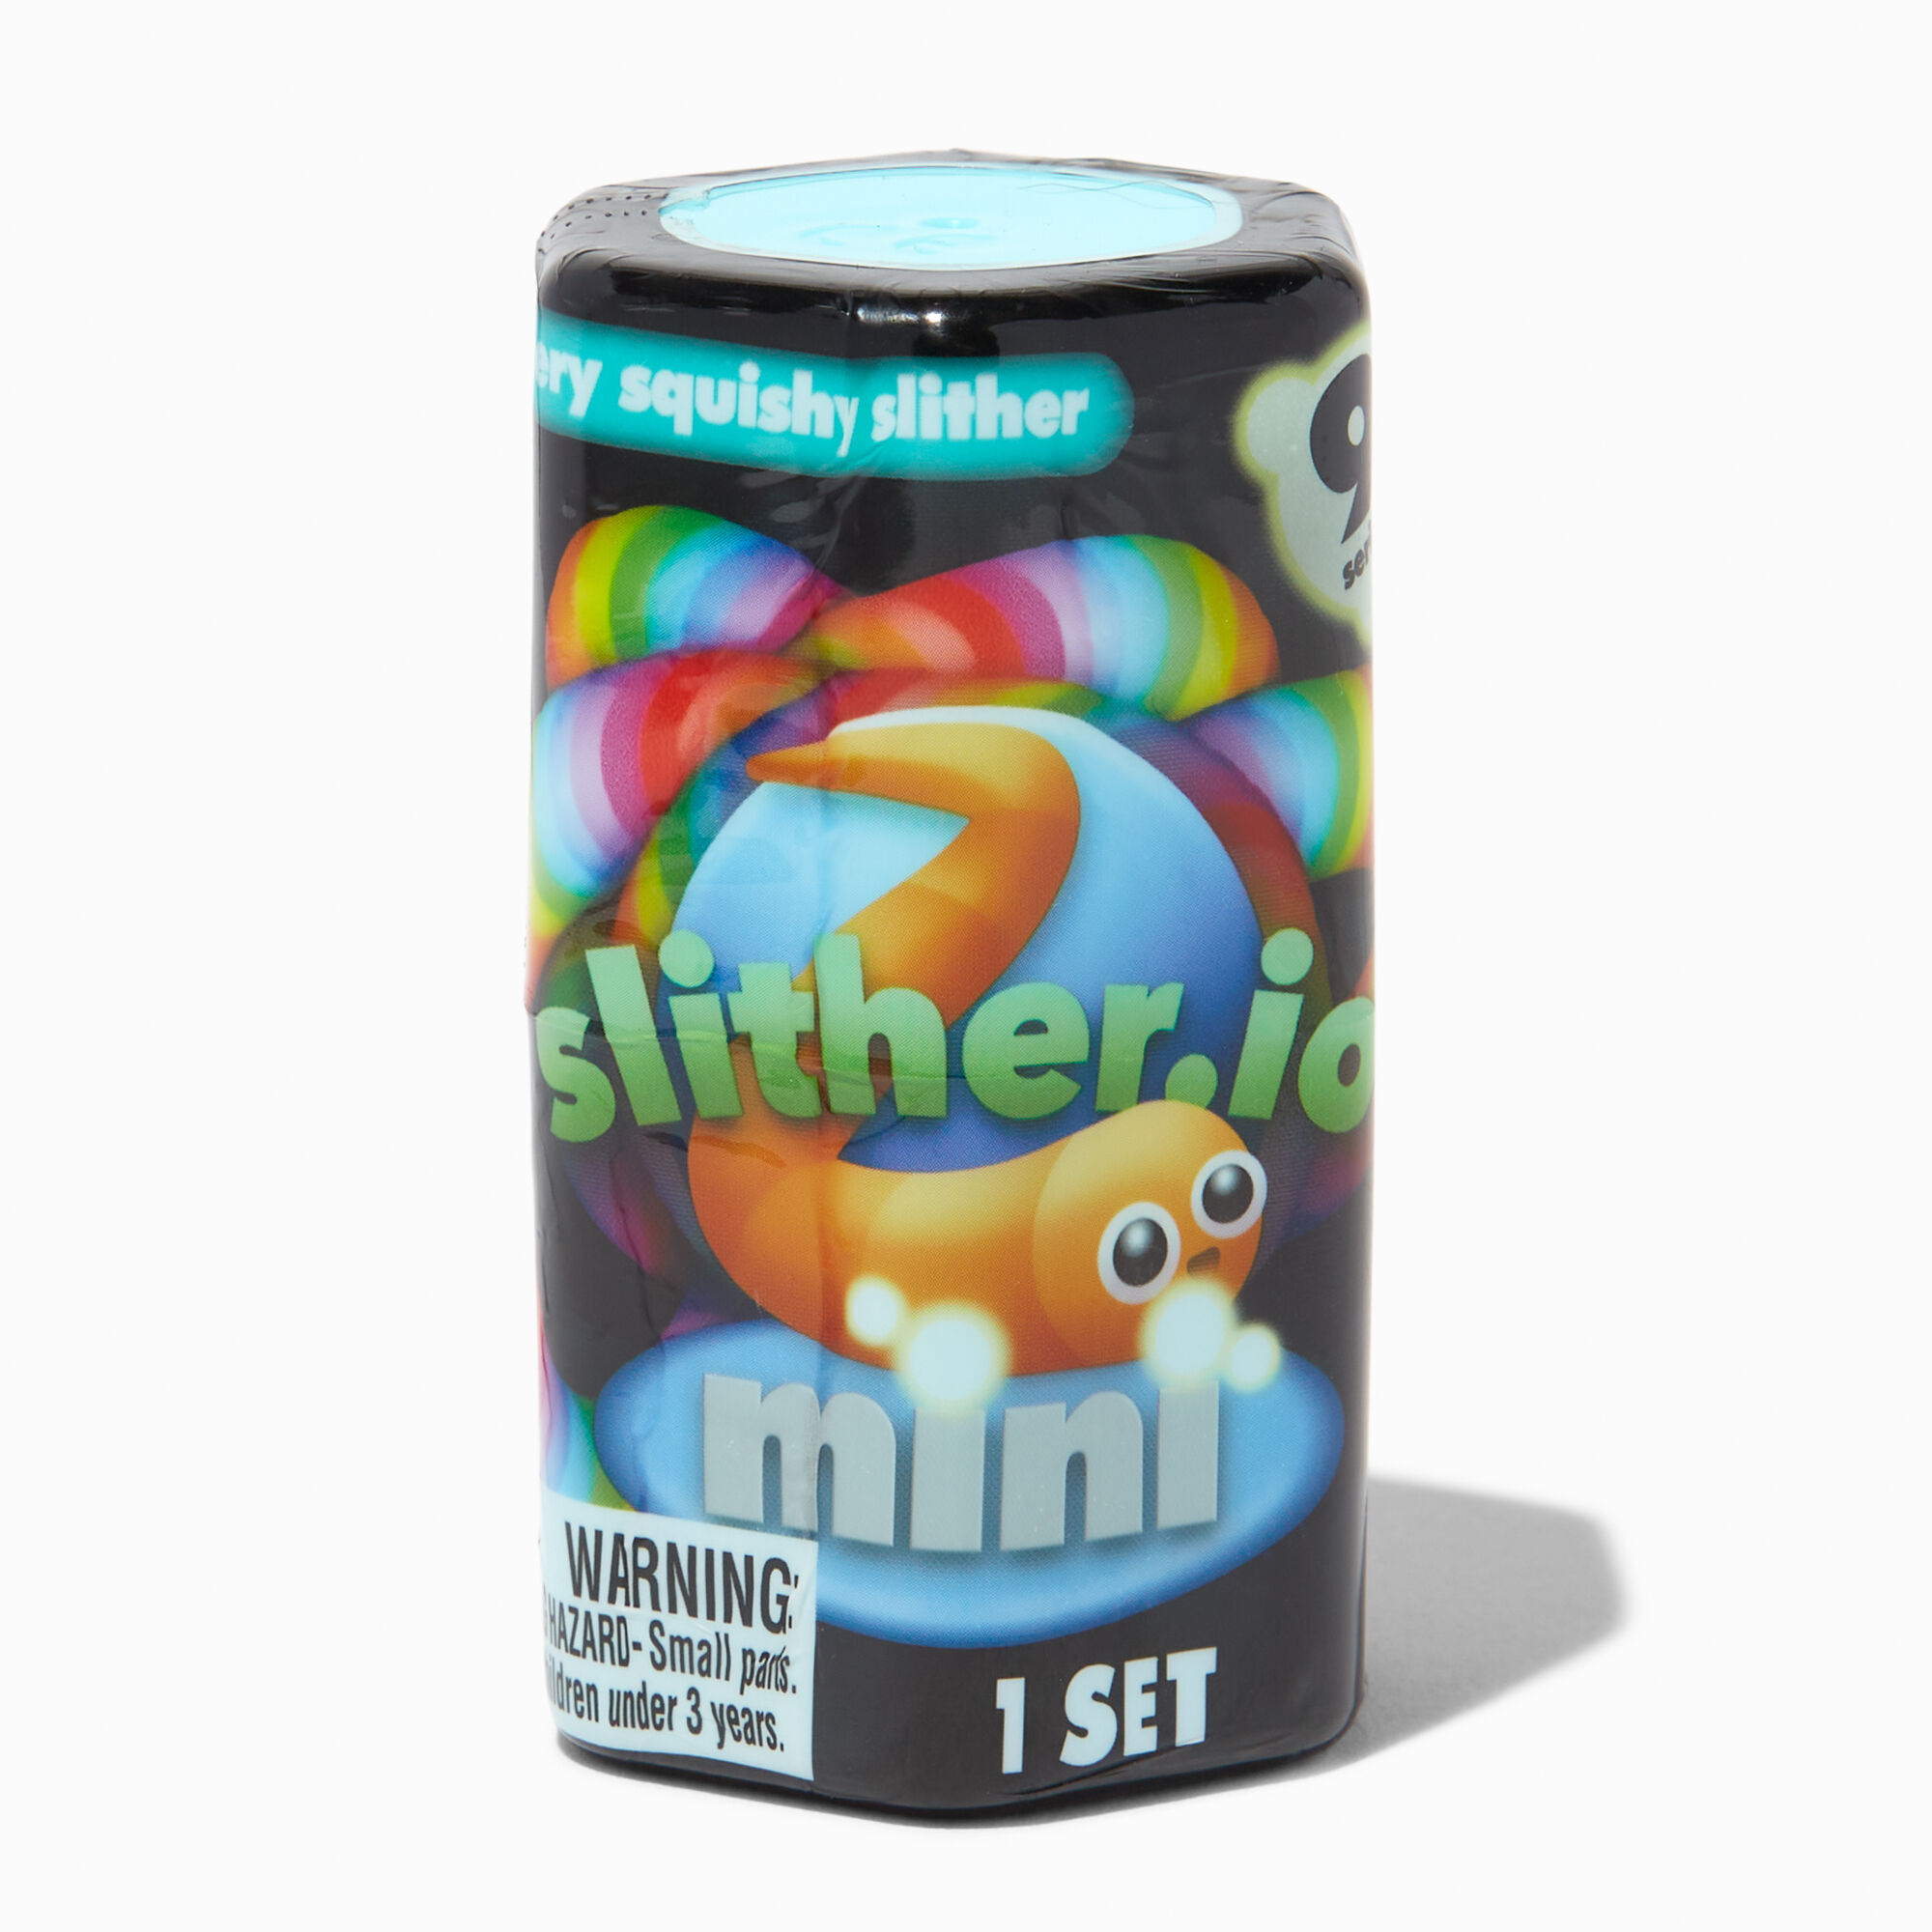 Slither.Io Cup 16oz